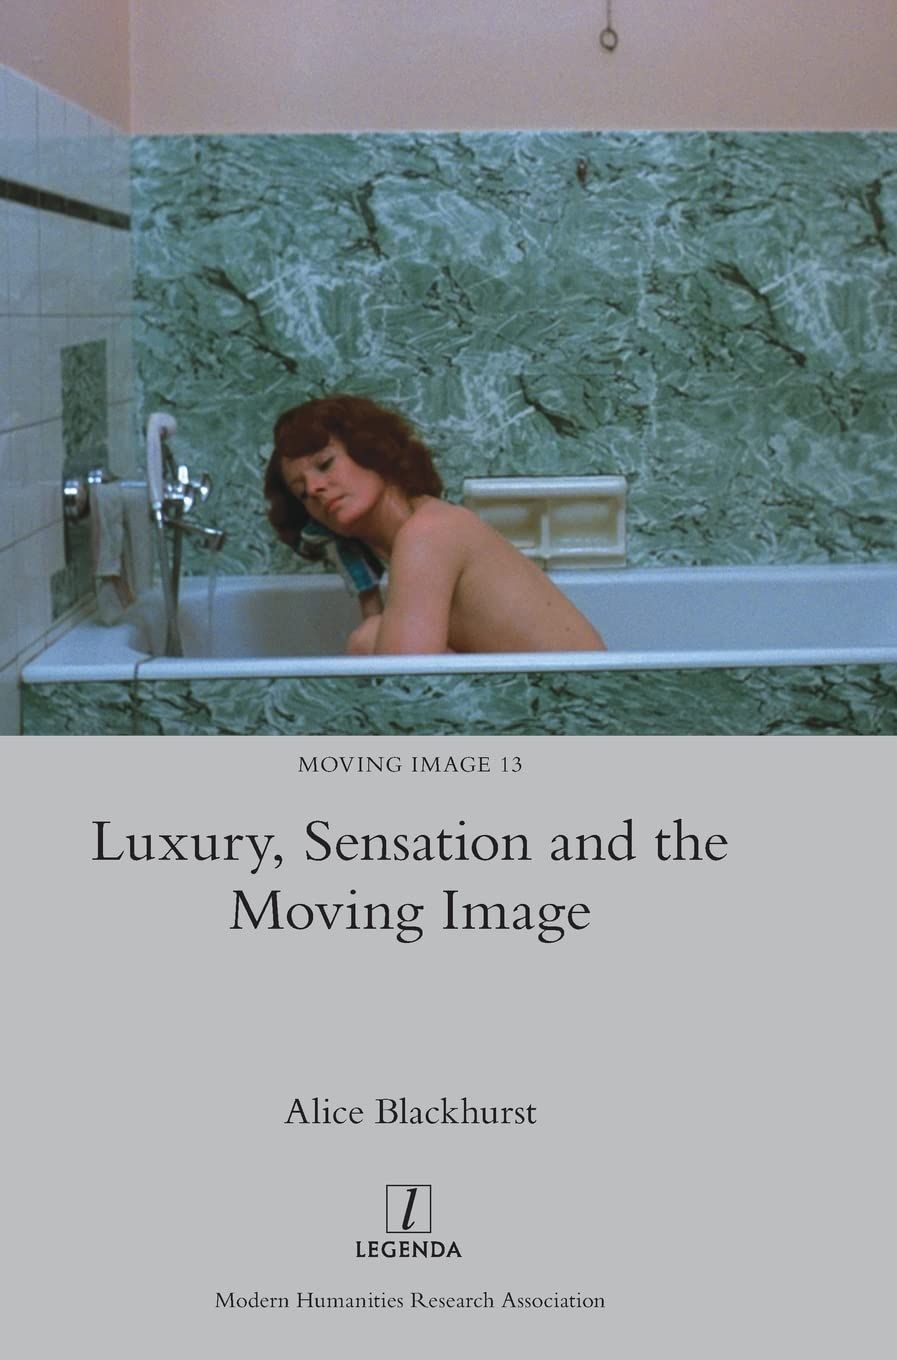 Carnal Thoughts: On Alice Blackhurst’s “Luxury, Sensation and the Moving Image”